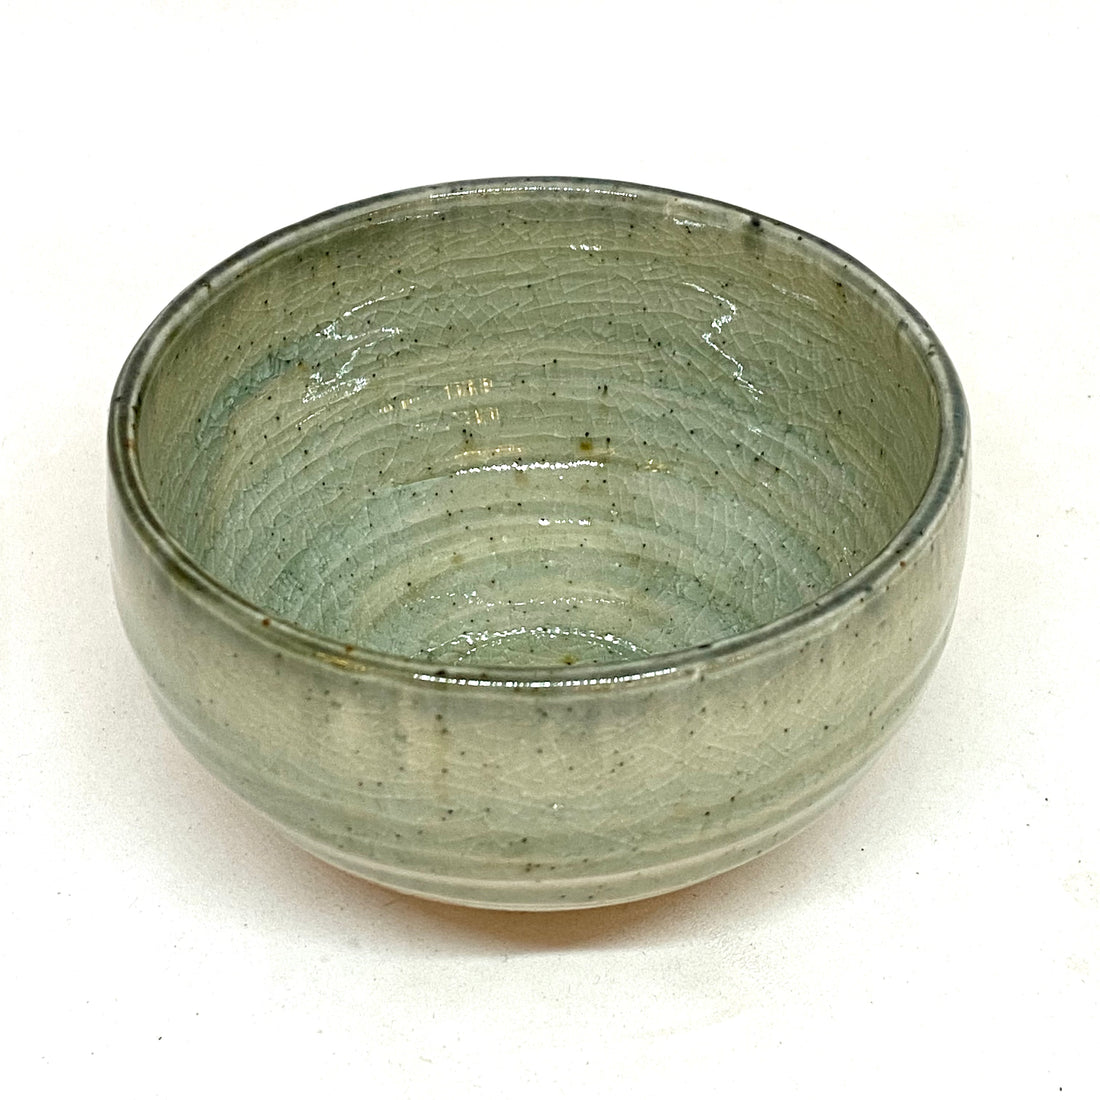 Japanese Tea Cup - Crackled Green